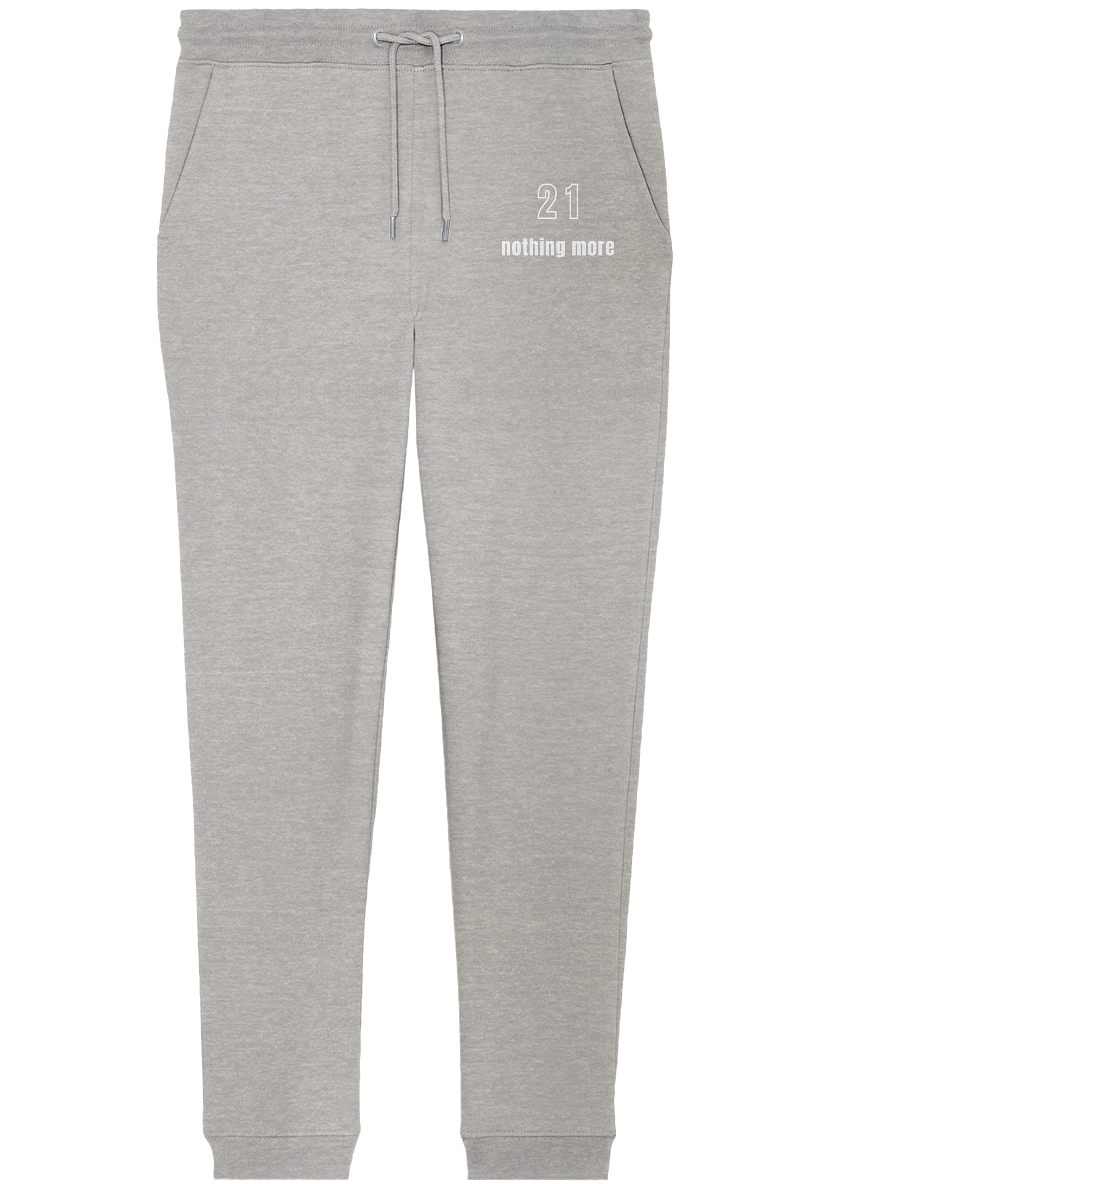 Minimalistisch - 21 nothing more - Organic Jogger Pants